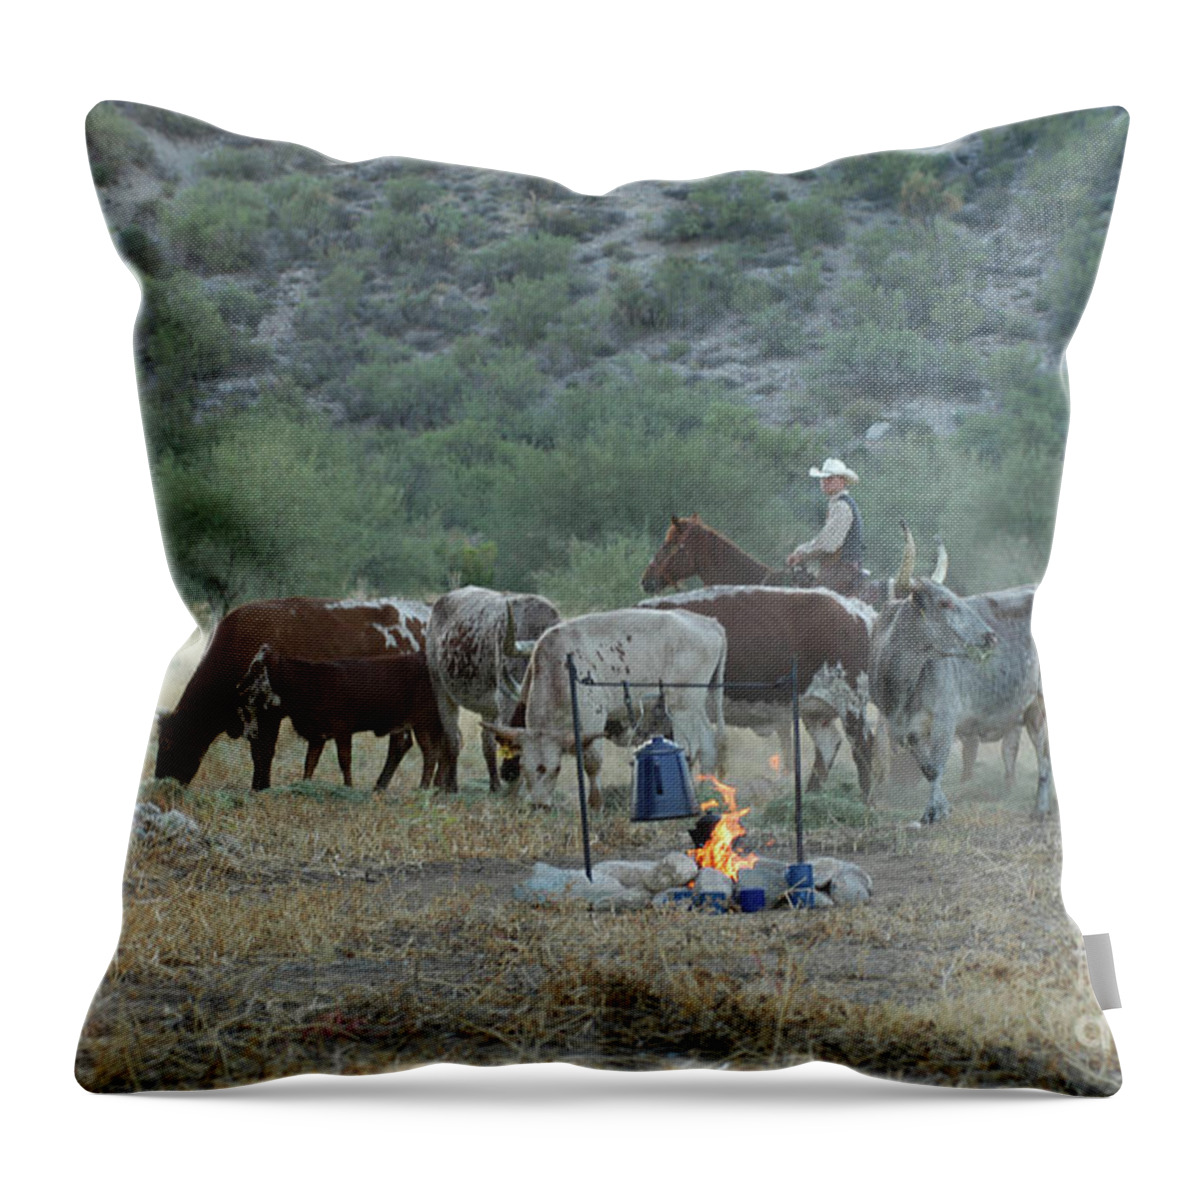 Western Throw Pillow featuring the photograph Campfire Cattle by Jody Miller